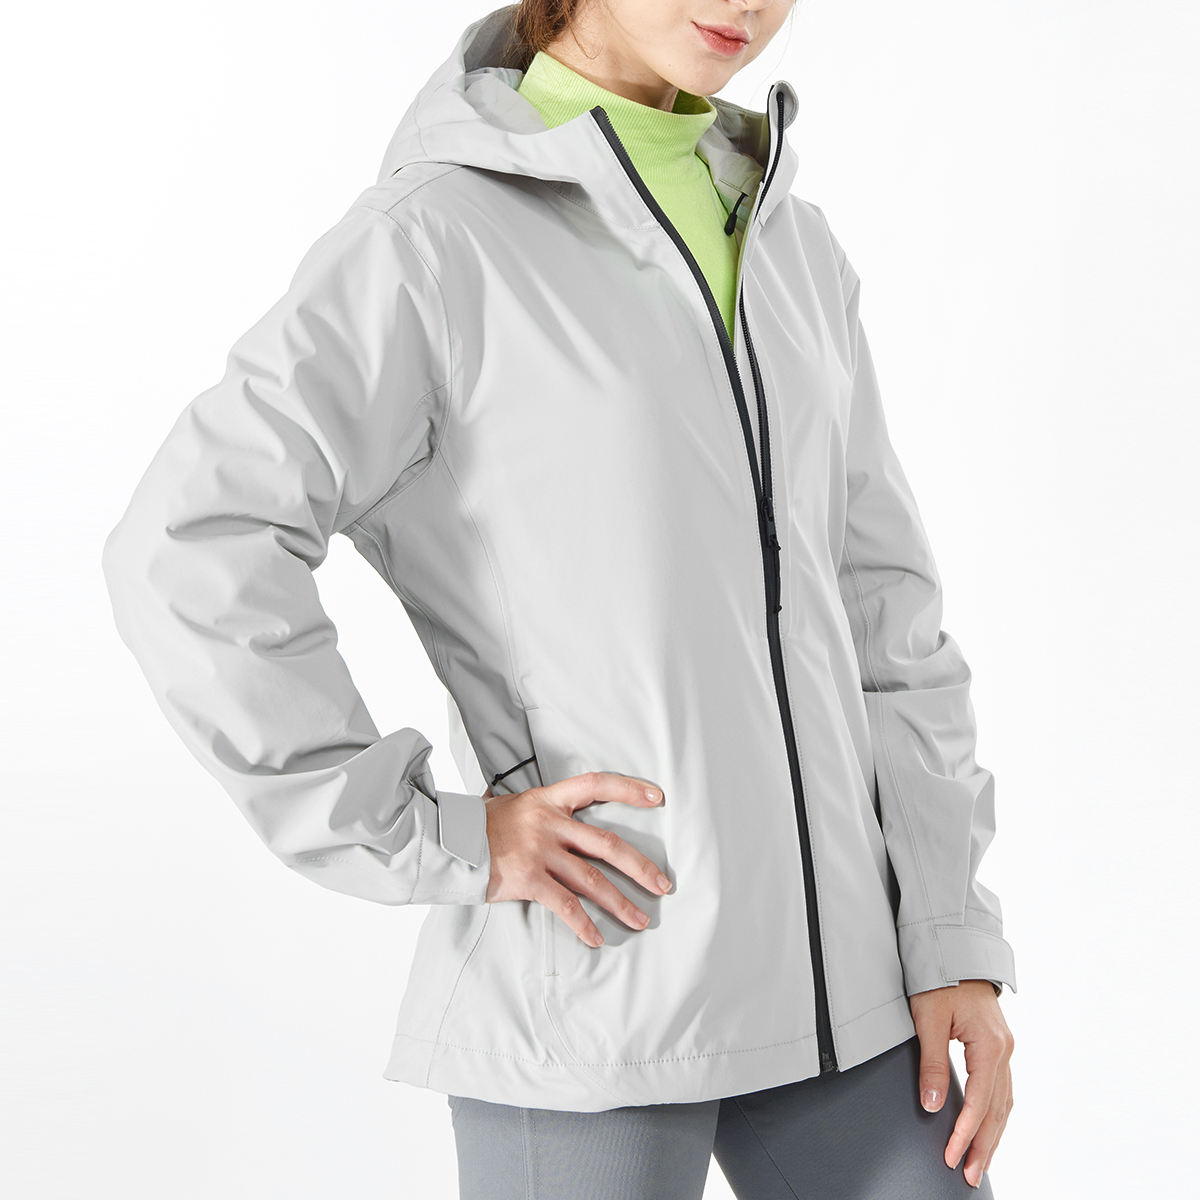 Gymax Women' Waterproof Jacket Hooded Coat w/Cuff Camping Gray Size M - image 1 of 10